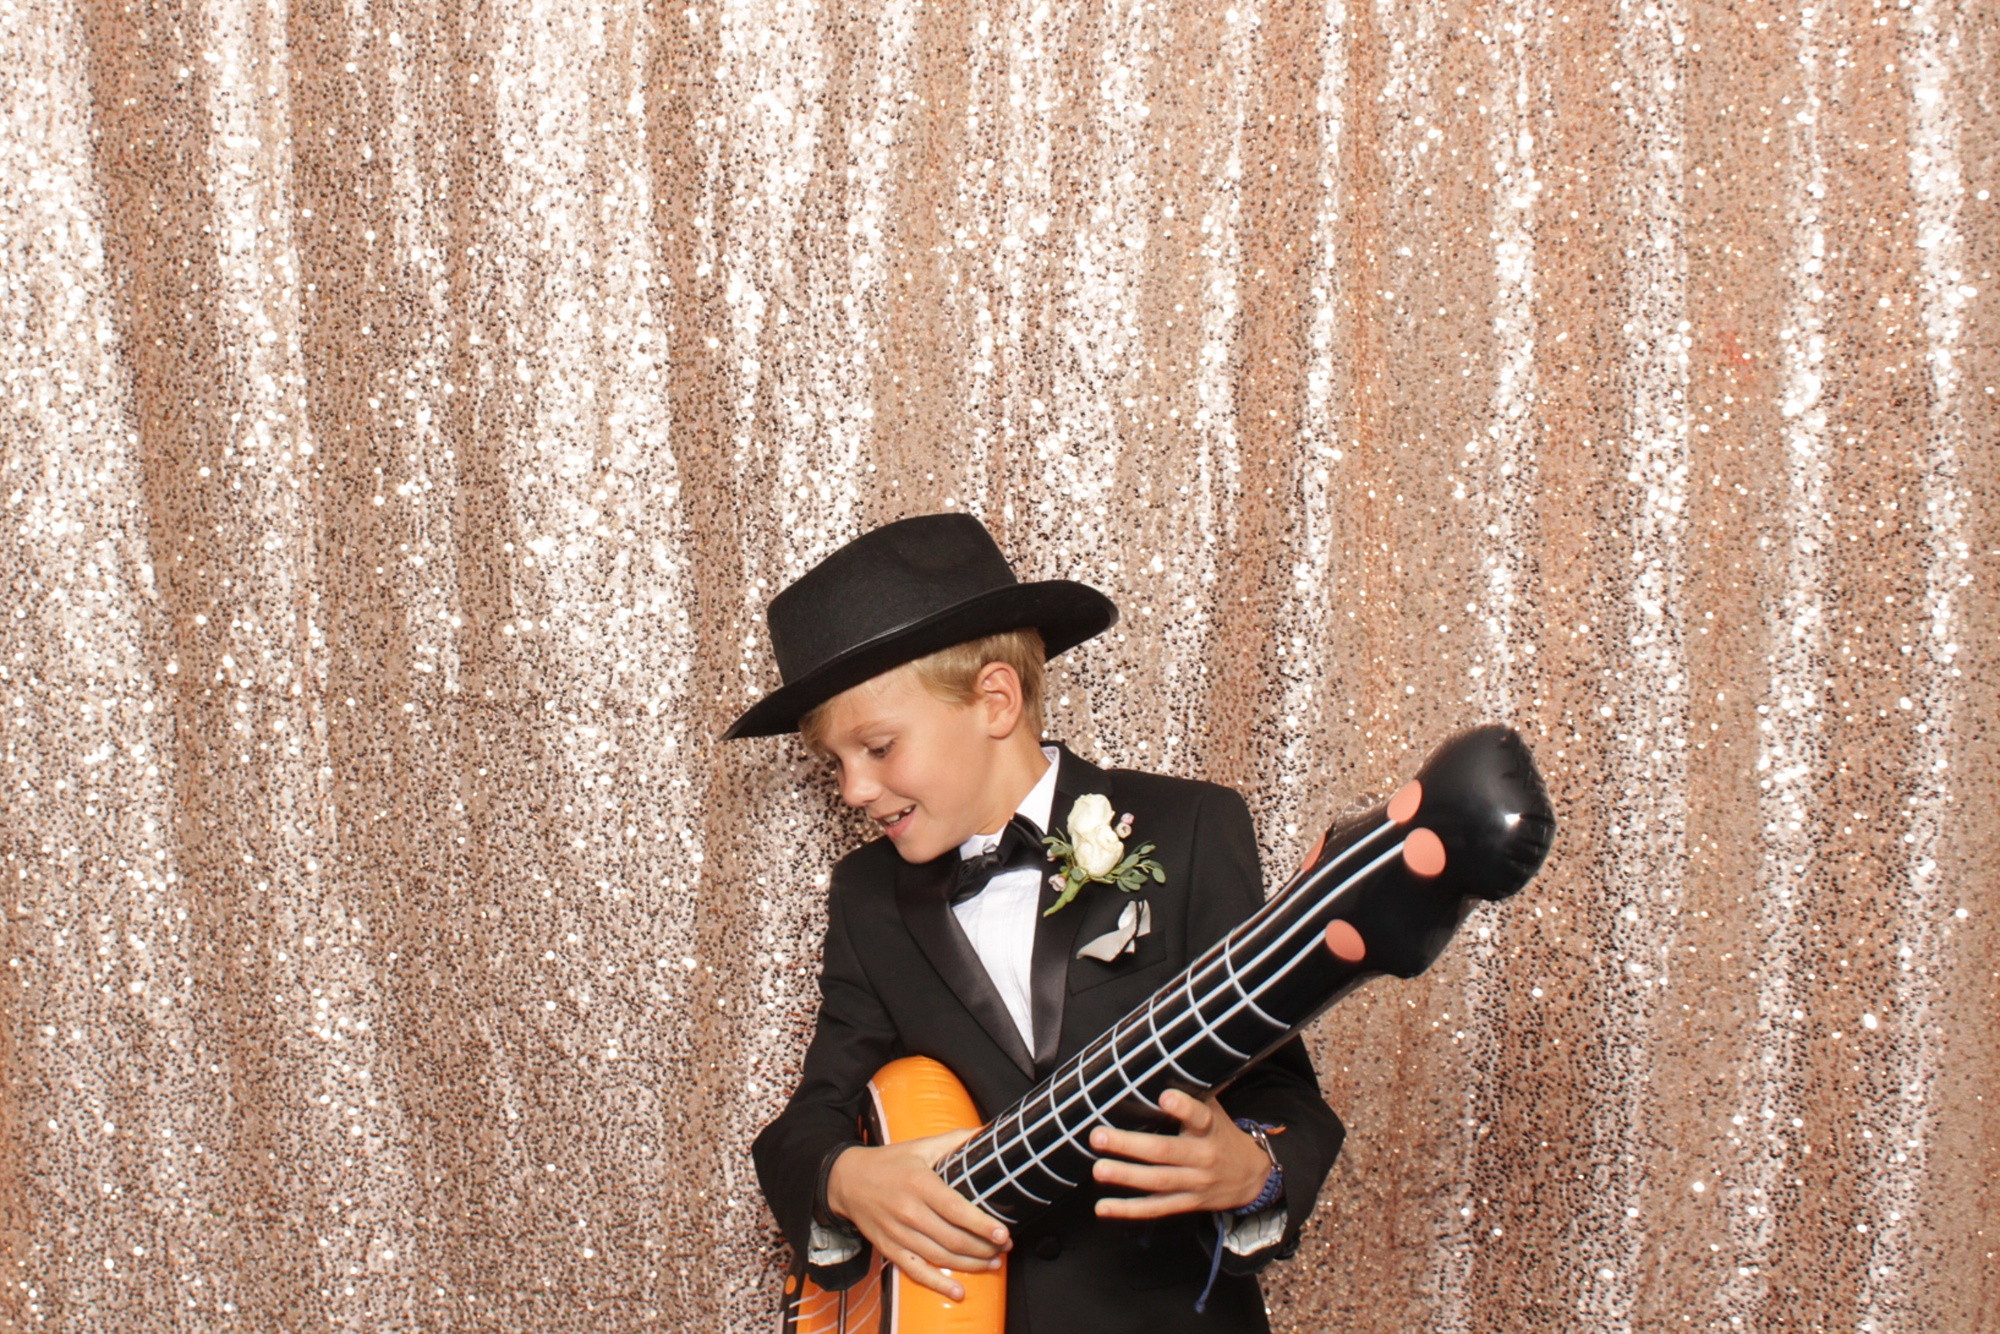 kid plays inflatable guitar during photo booth fun